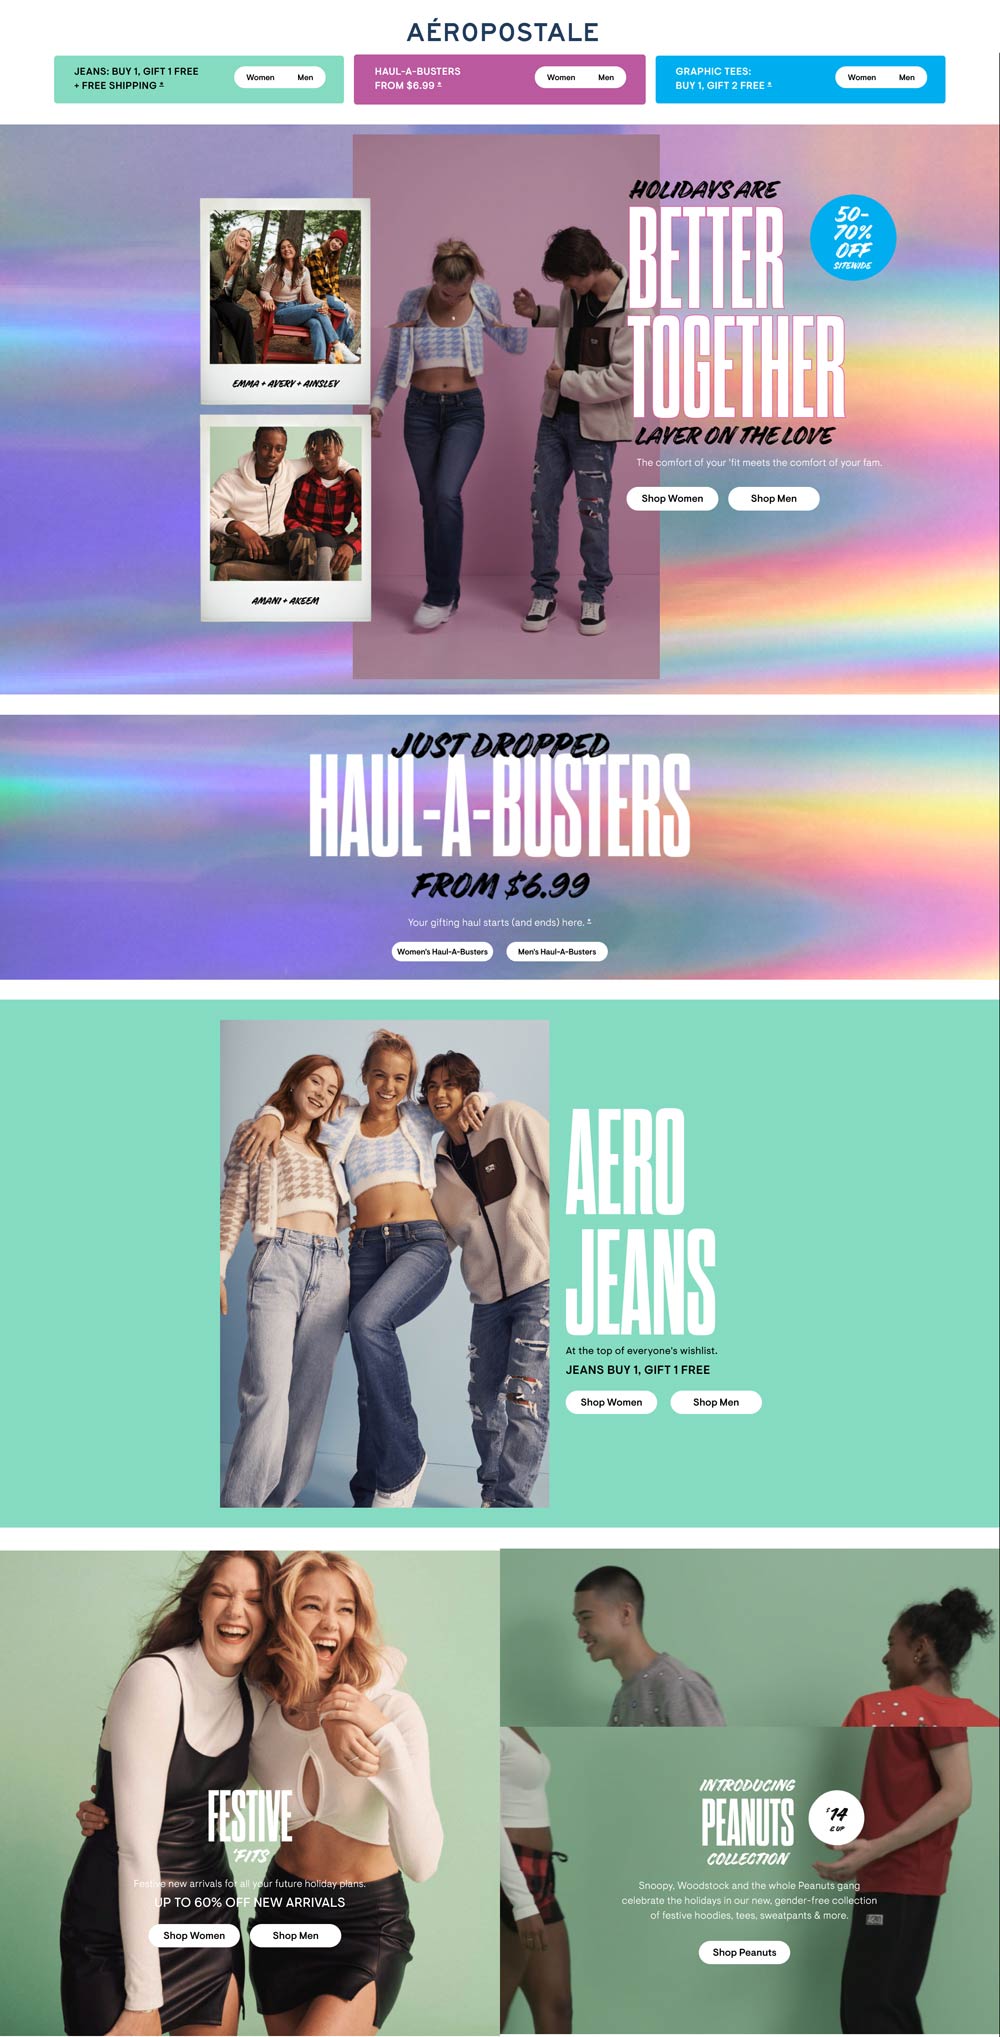 Aeropostale stores Coupon  3-for-1 tees & second jeans free at Aeropostale #aeropostale 